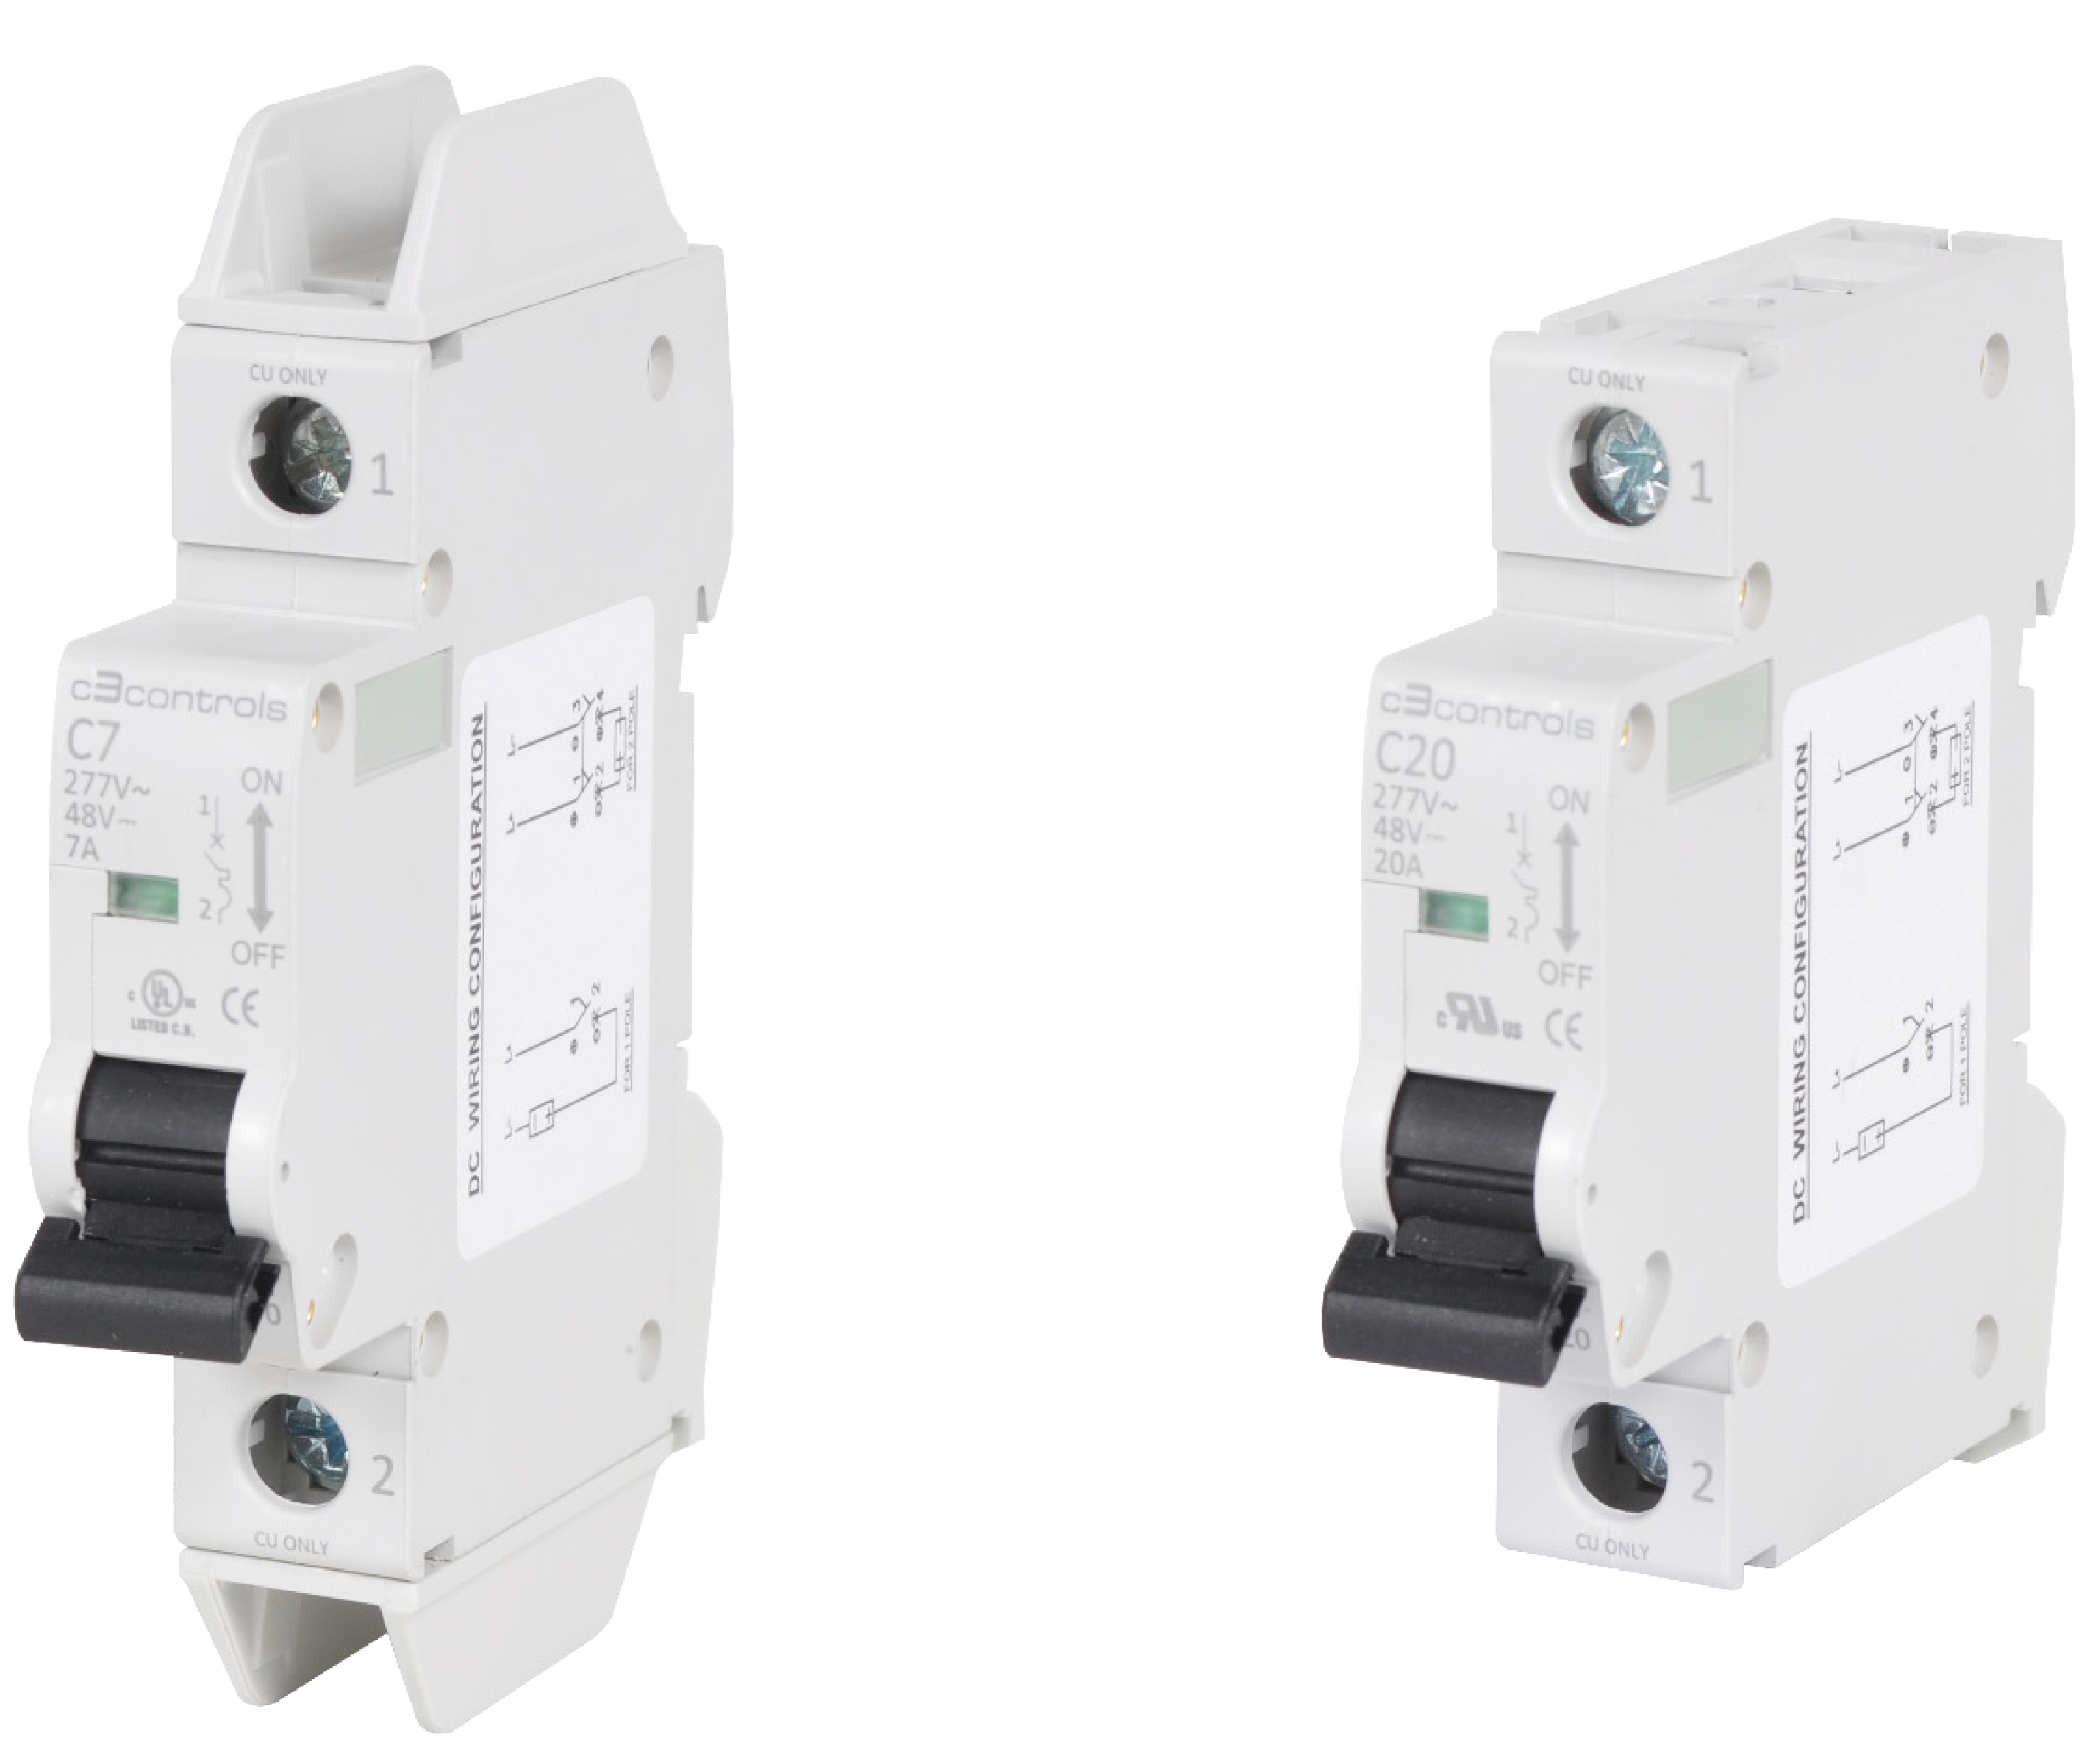 DIN Rail Mounted Siemens 5SY63067 Supplementary Protector 6 Ampere Maximum 3 Pole Breaker UL 1077 Rated Tripping Characteristic C 